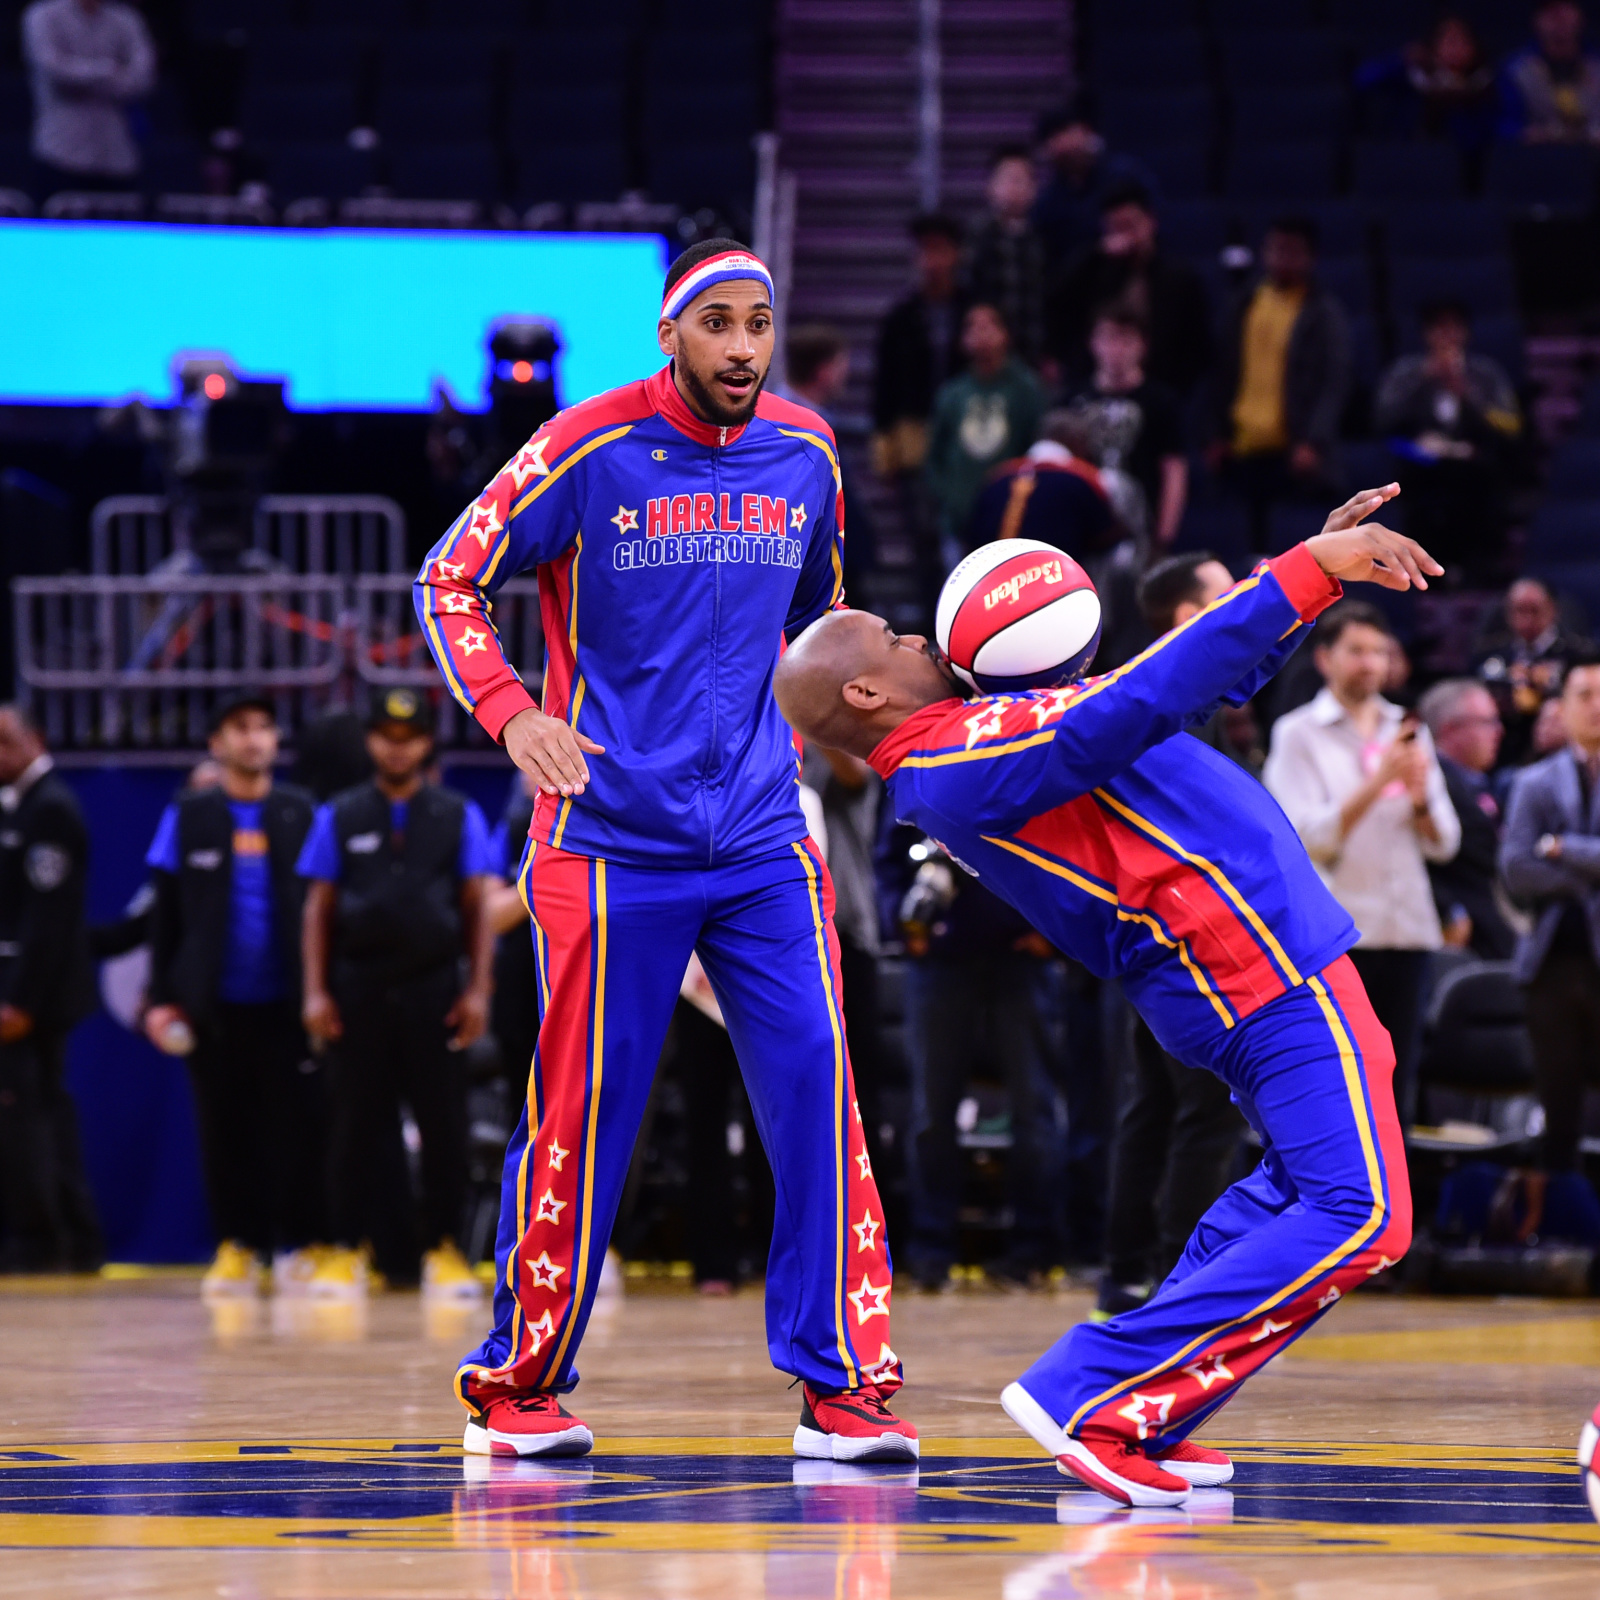 Harlem Globetrotters Petition NBA, Adam Silver to Grant Them an